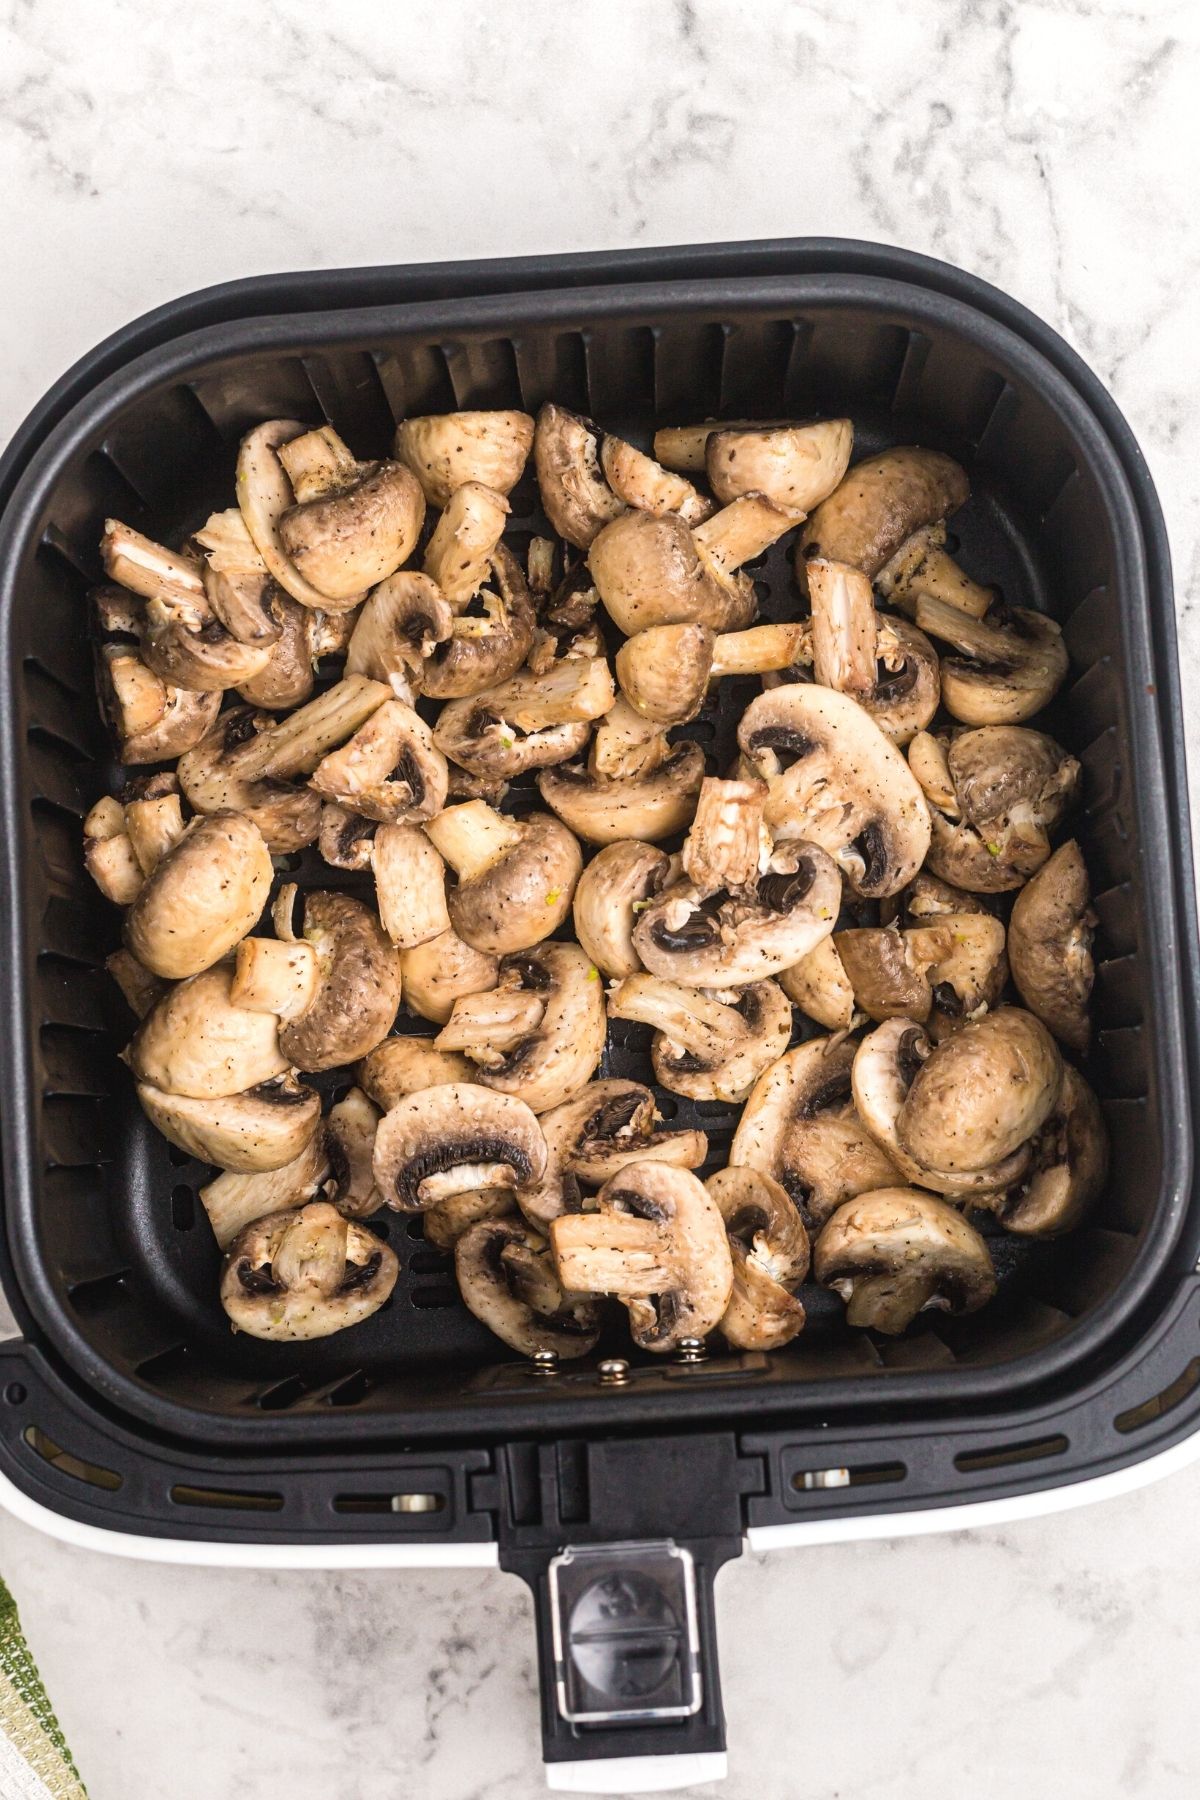 Mushrooms tossed with butter and seasonings in the air fryer basket before being cooked